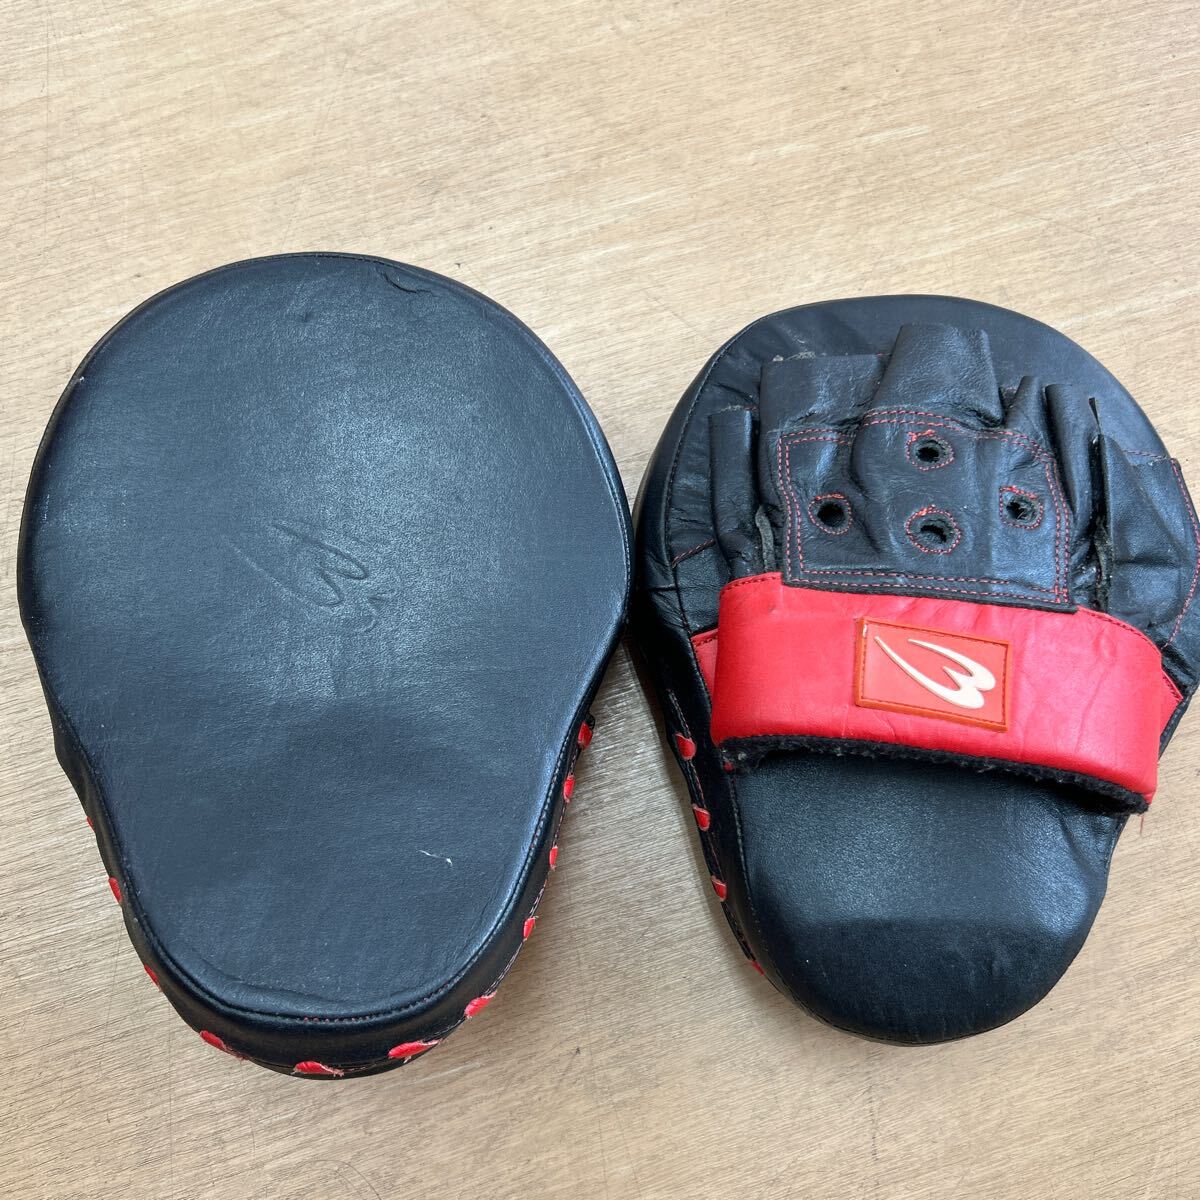 BODYMAKER body Manufacturers punching mitt black × red black red color boxing combative sports karate training exercise 